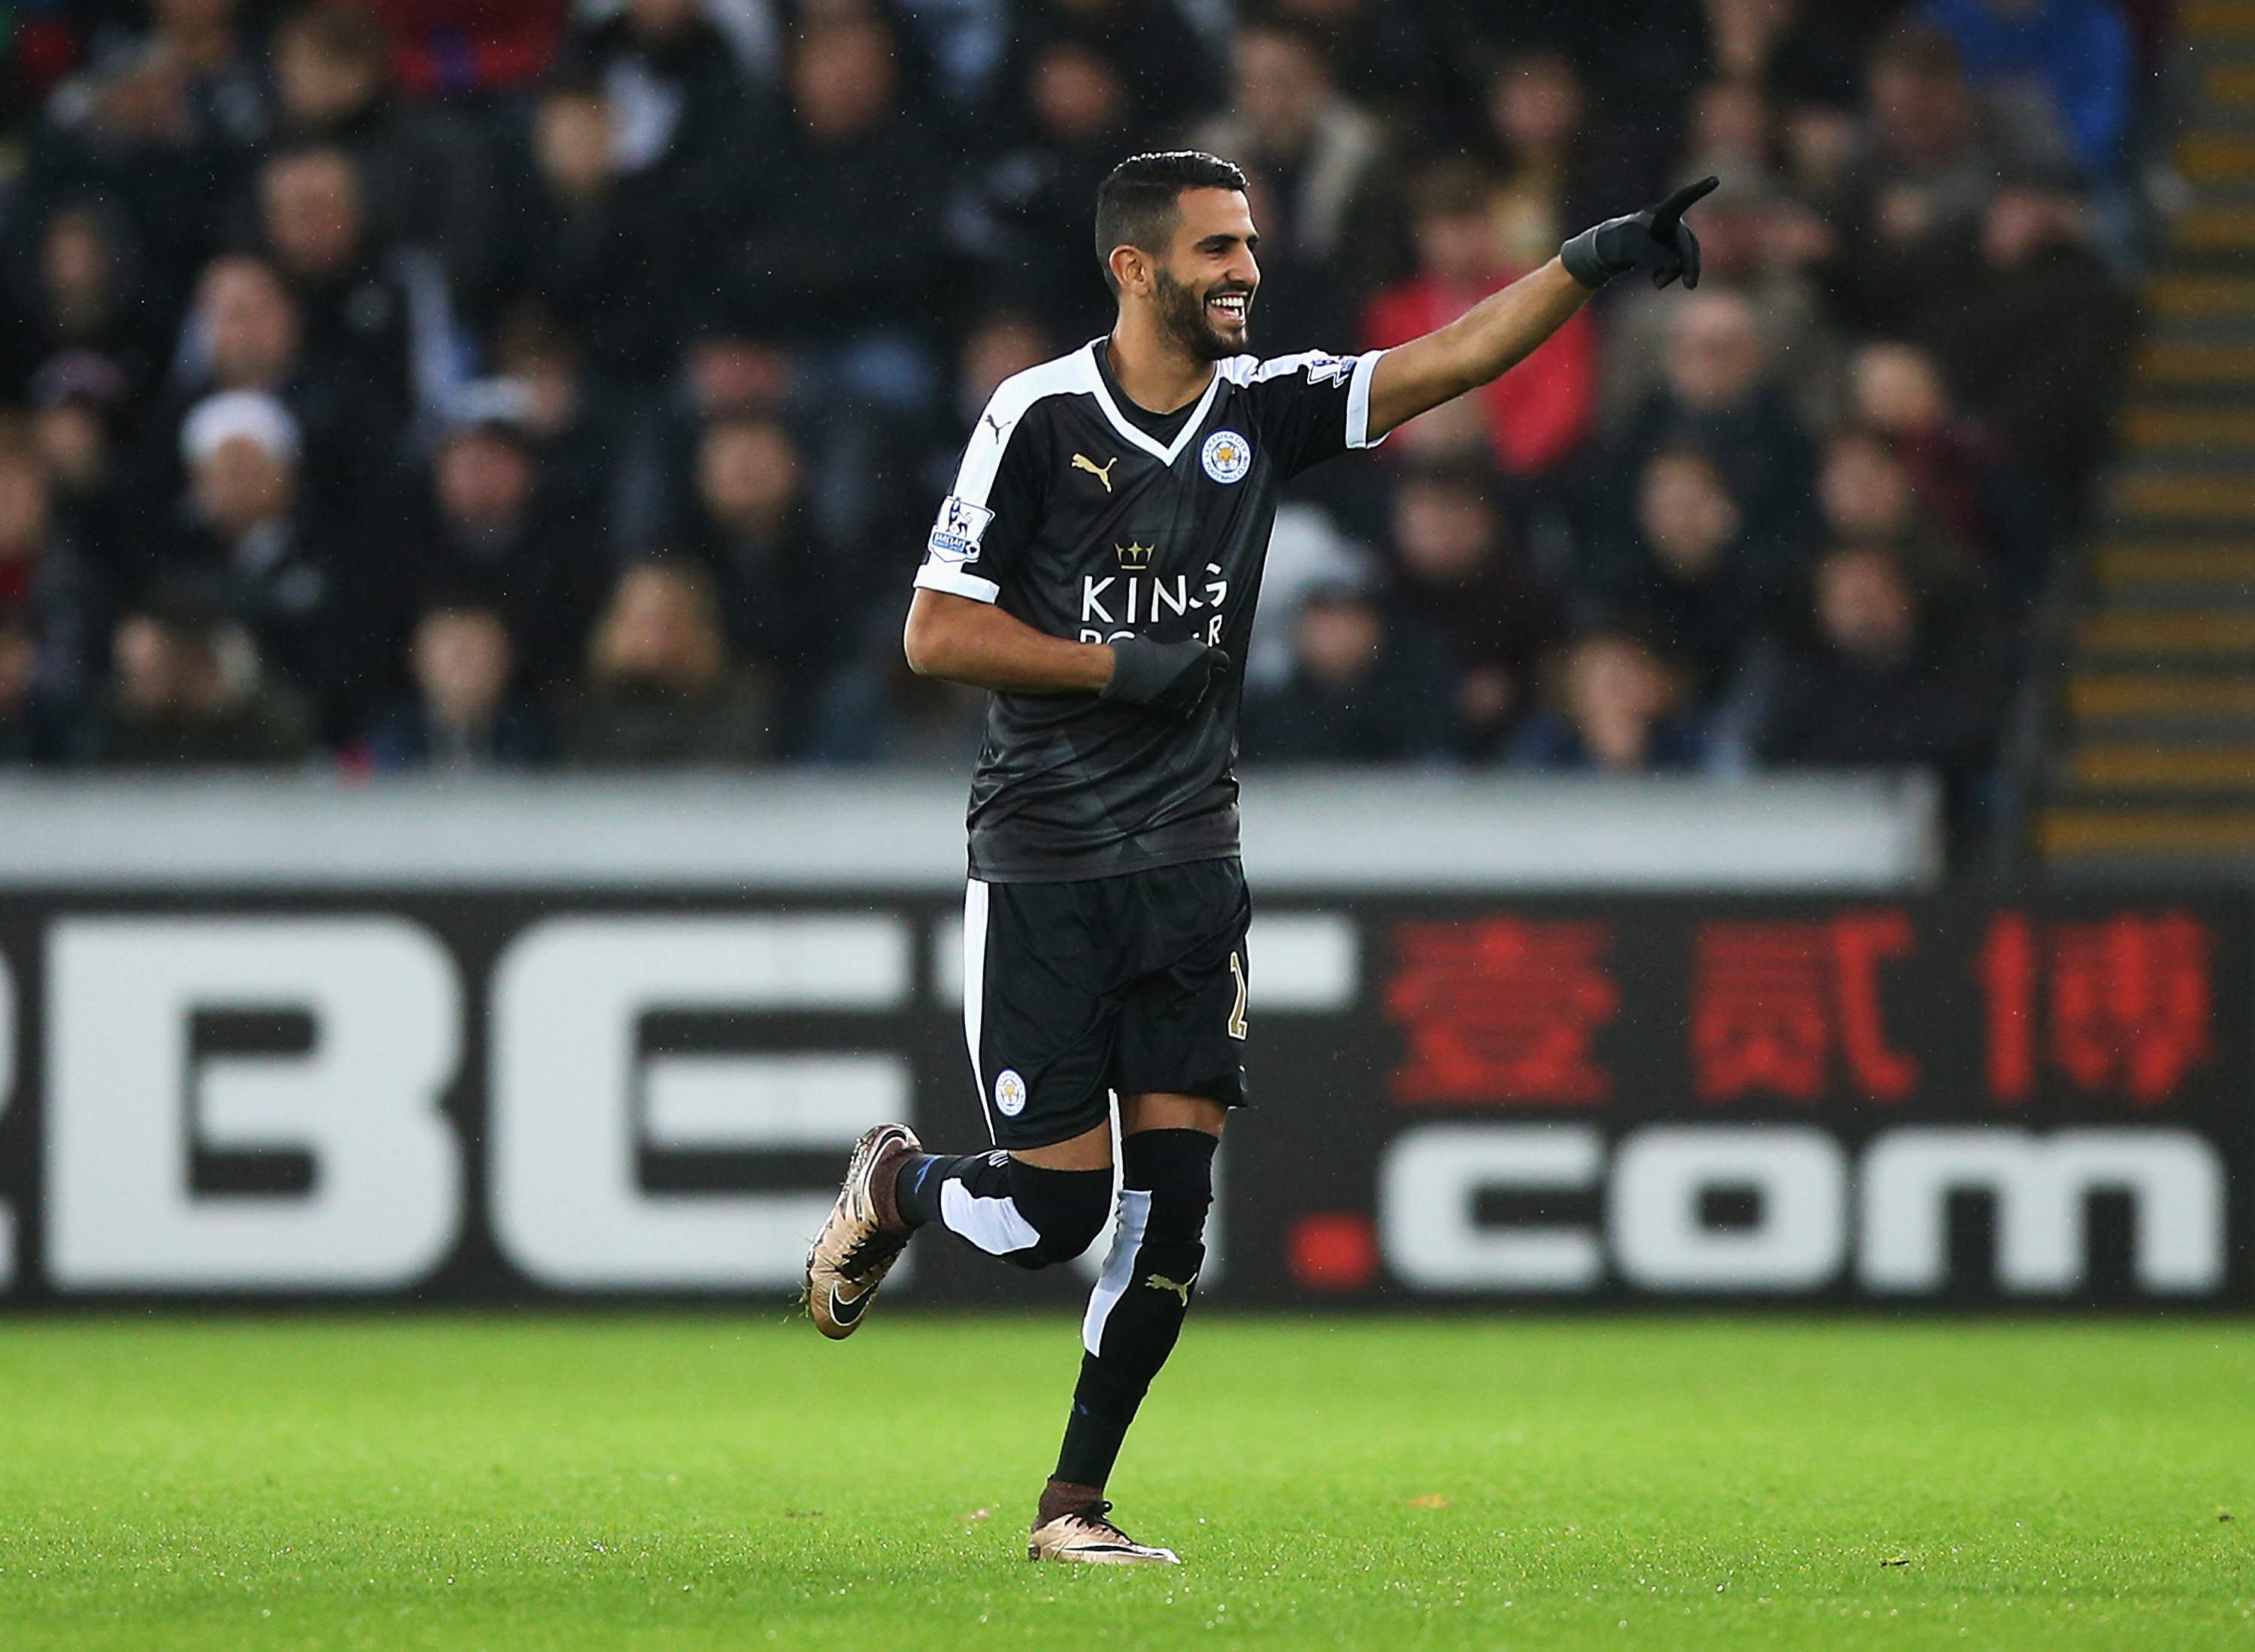 Leicester City are proving they're the real deal, with Mahrez at the front of the queue.